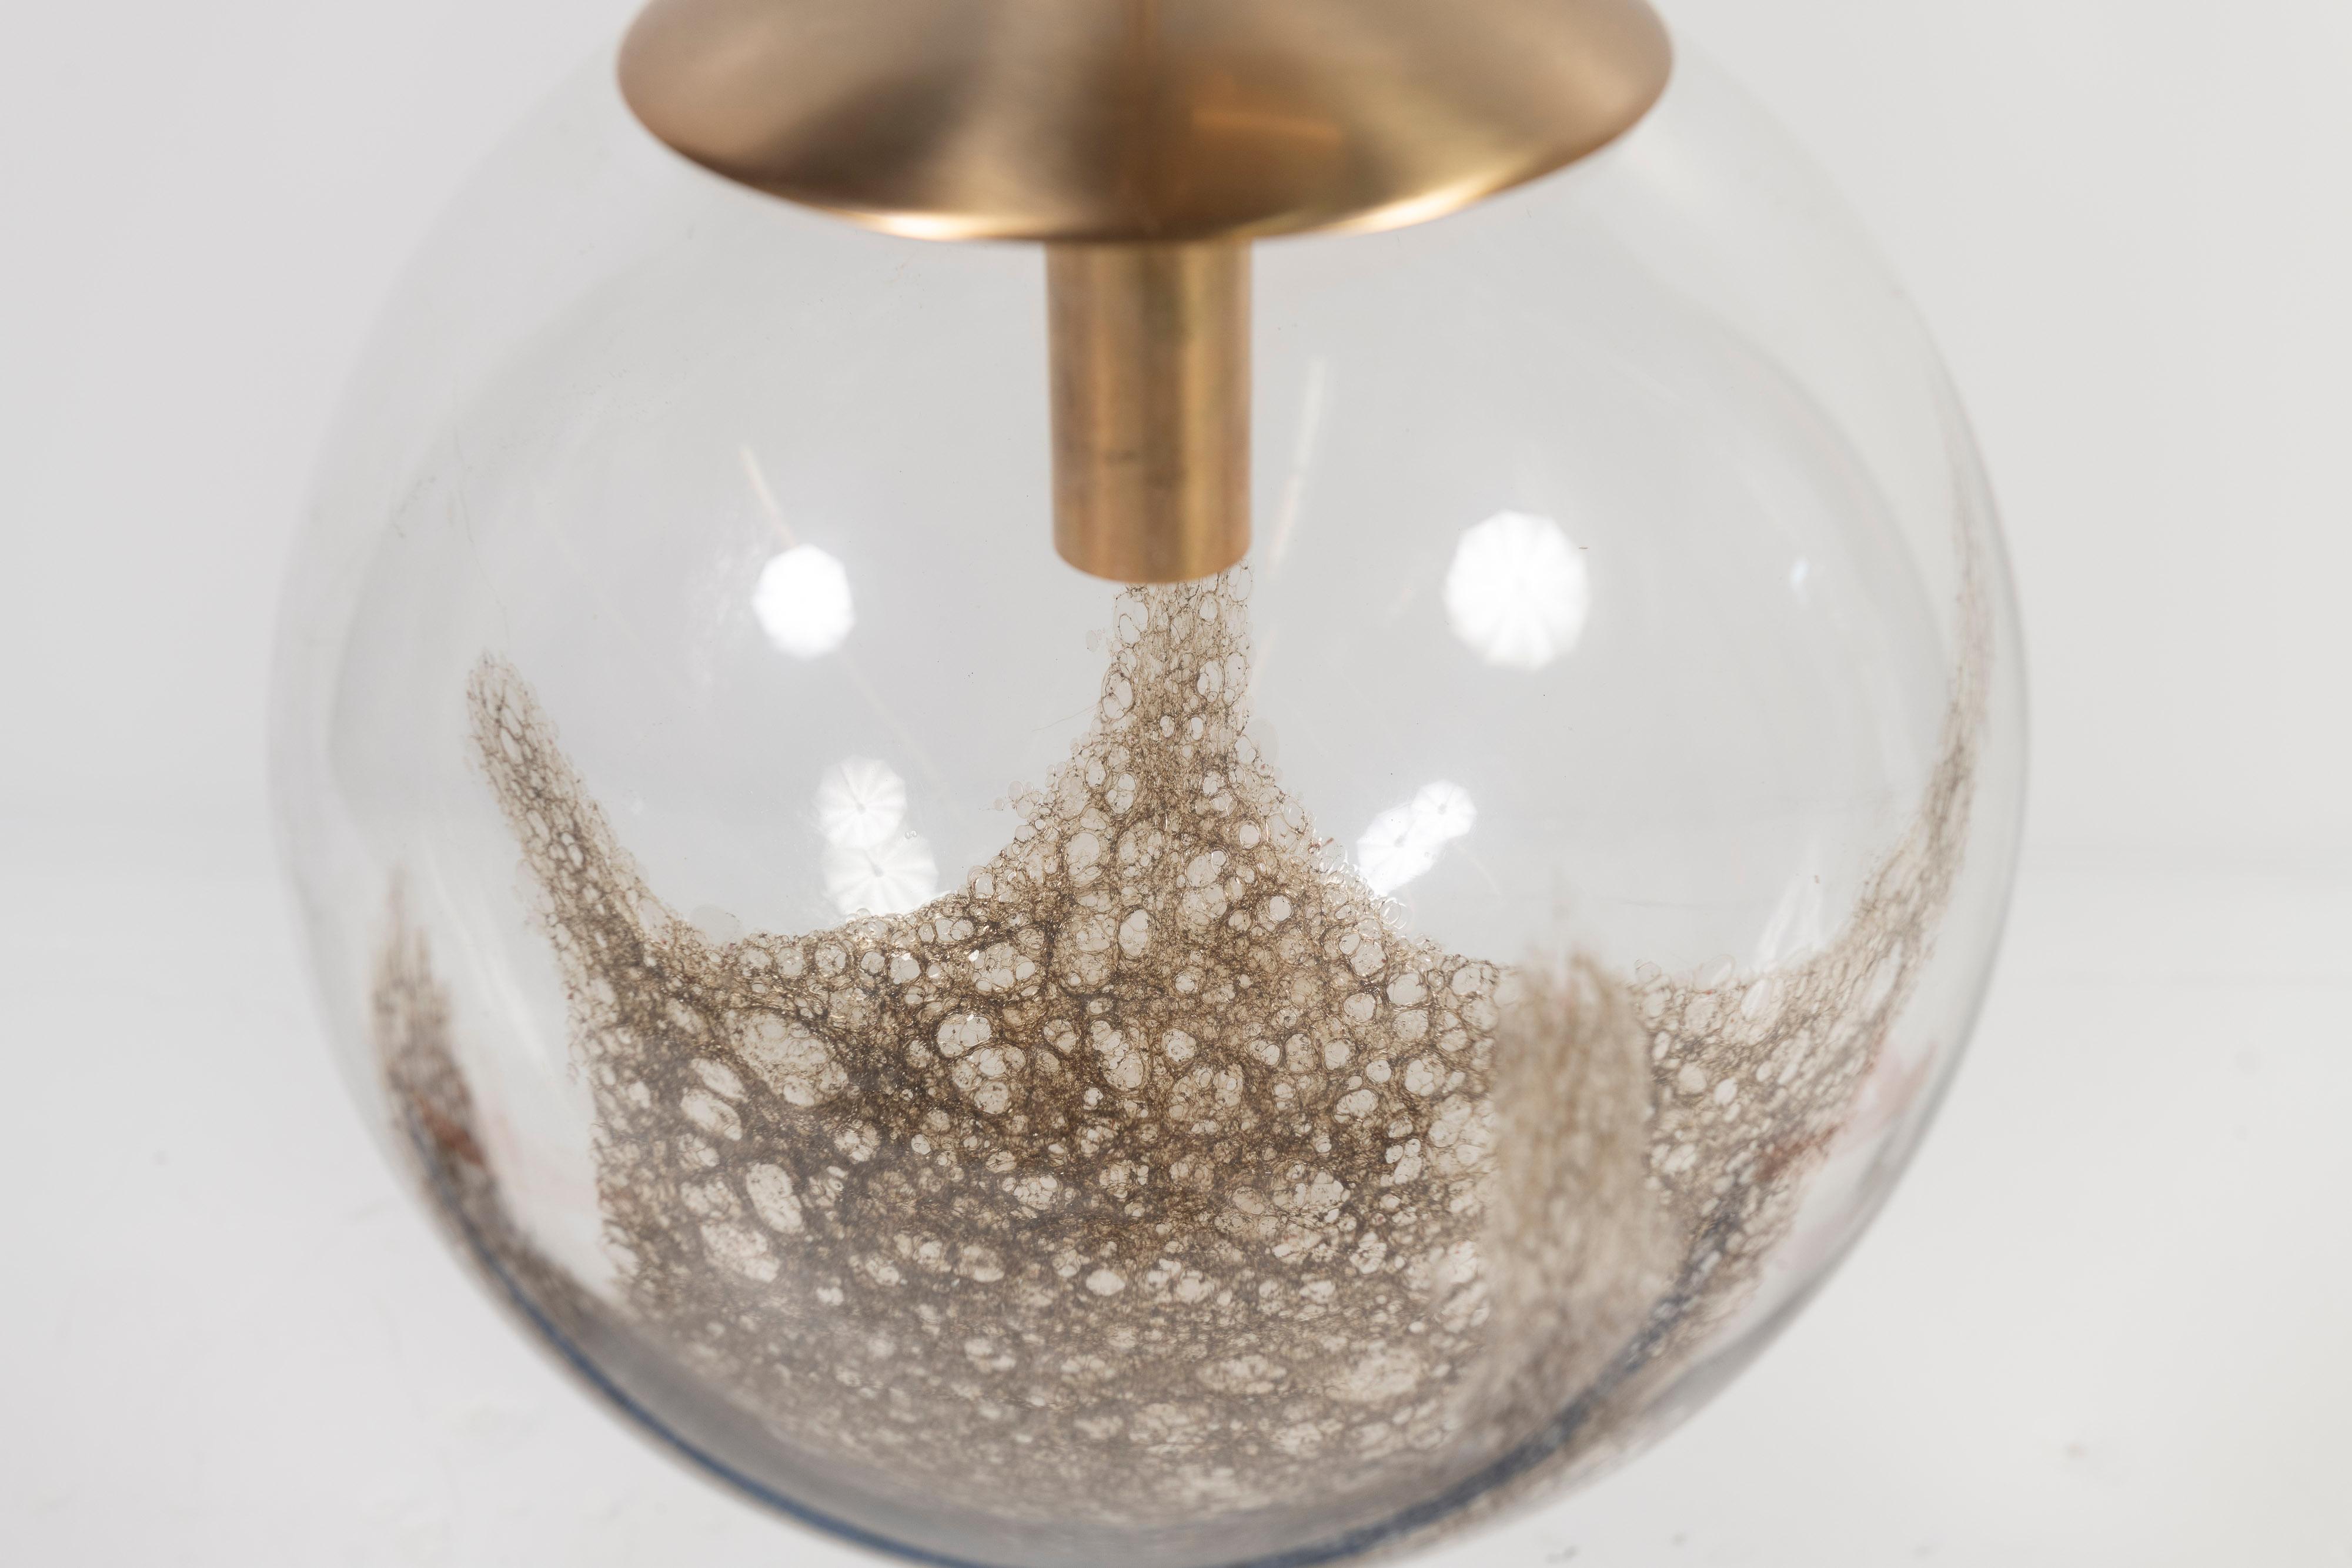 Gorgeous Murano glass globe is splattered with bronze colored effects on the interior and designed by Carlo Nason for Mazzega. The pendant shimmers when lit, casting a lovely reflection all around.   The fixture hangs from a brass canopy and has an